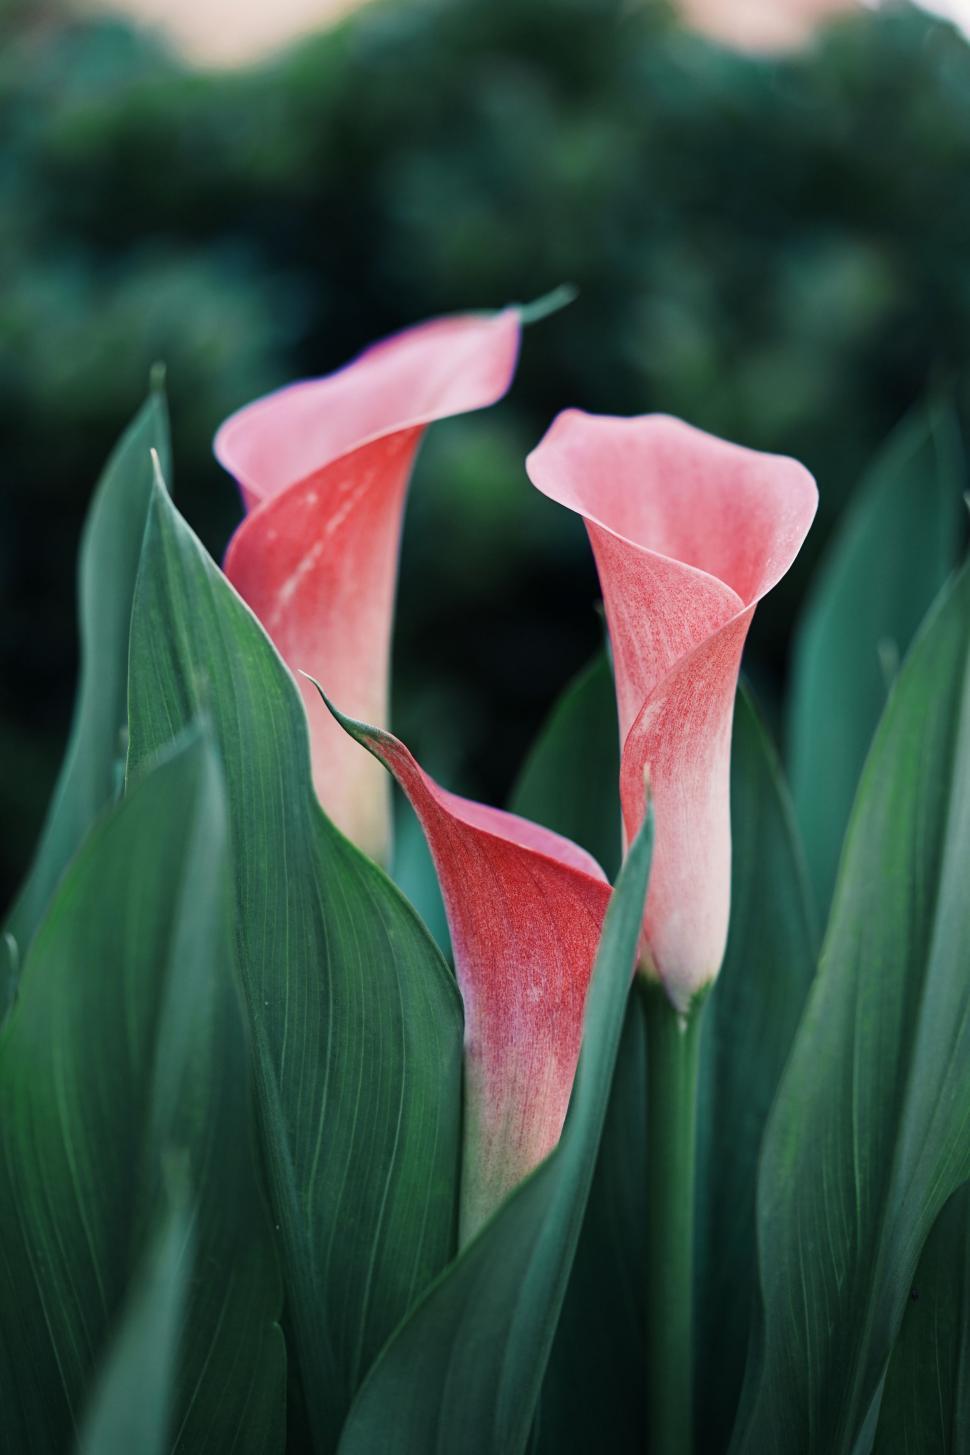 Free Image of Two Pink Flowers With Green Leaves 